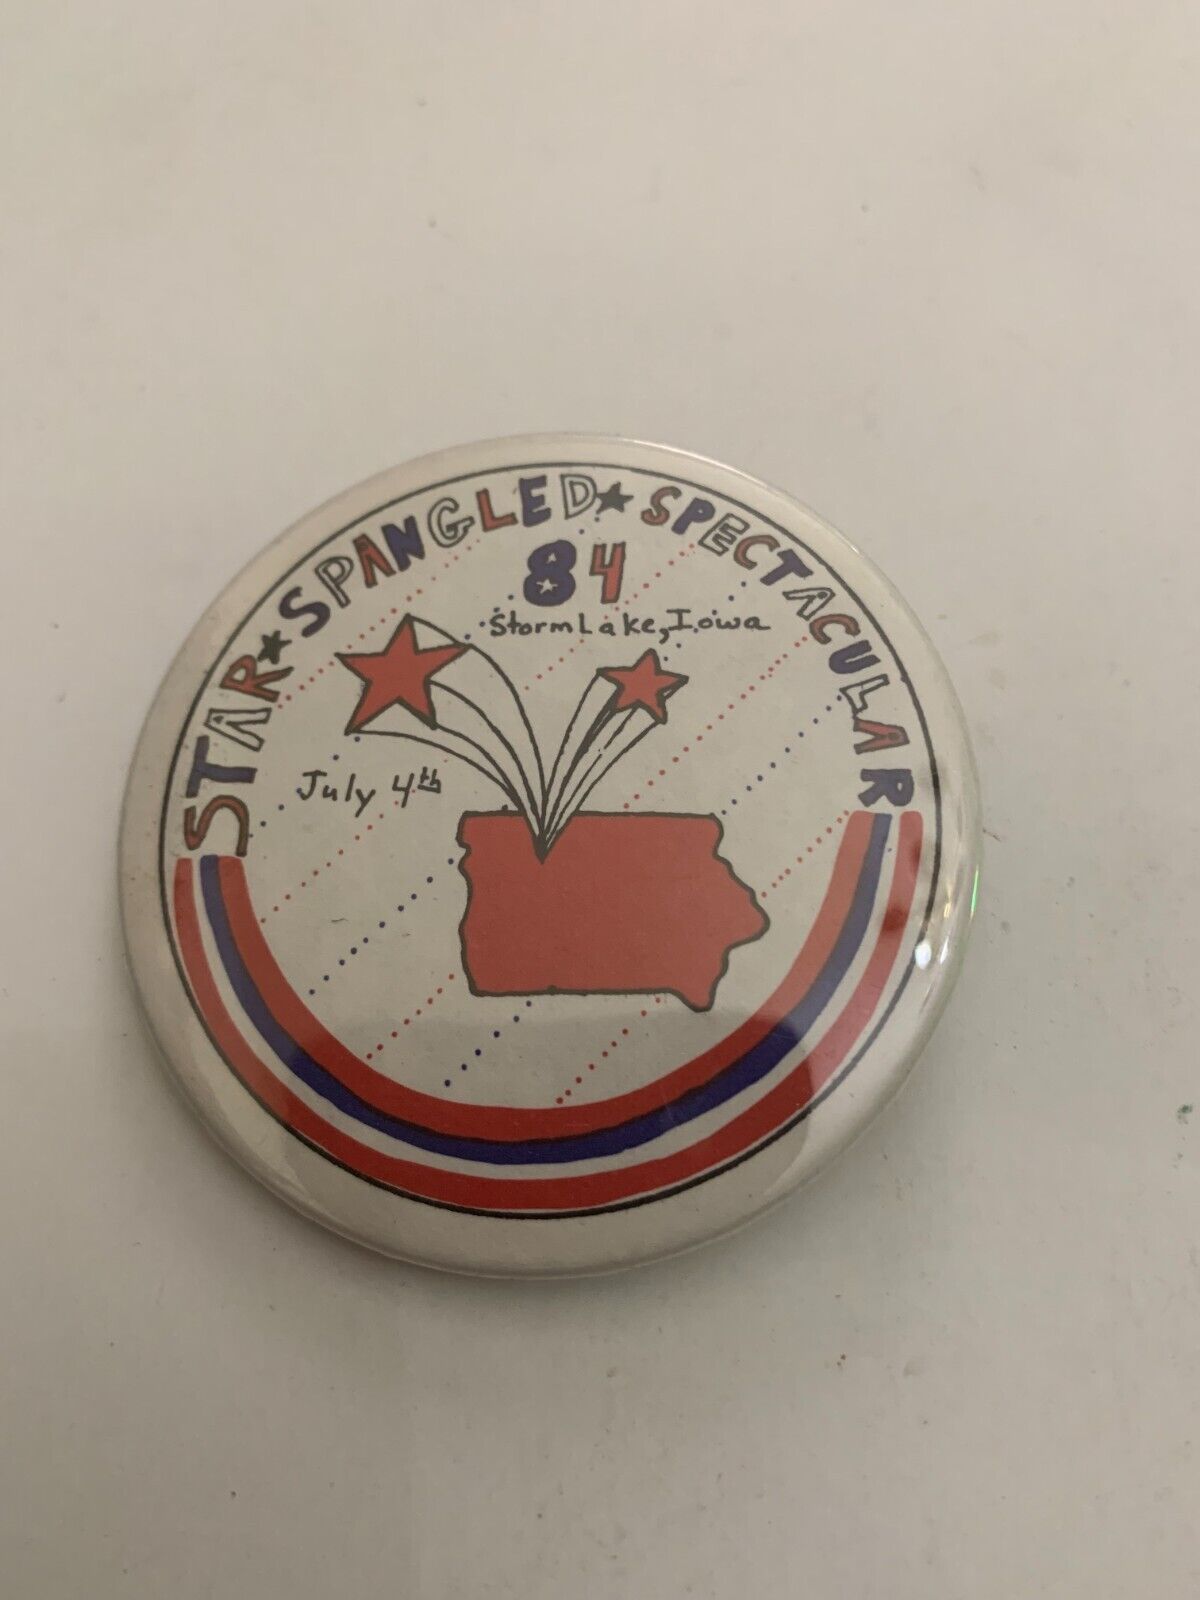 Vintage 1984 Star Spangled Spectacular July 4th Storm Lake Iowa Pinback Button